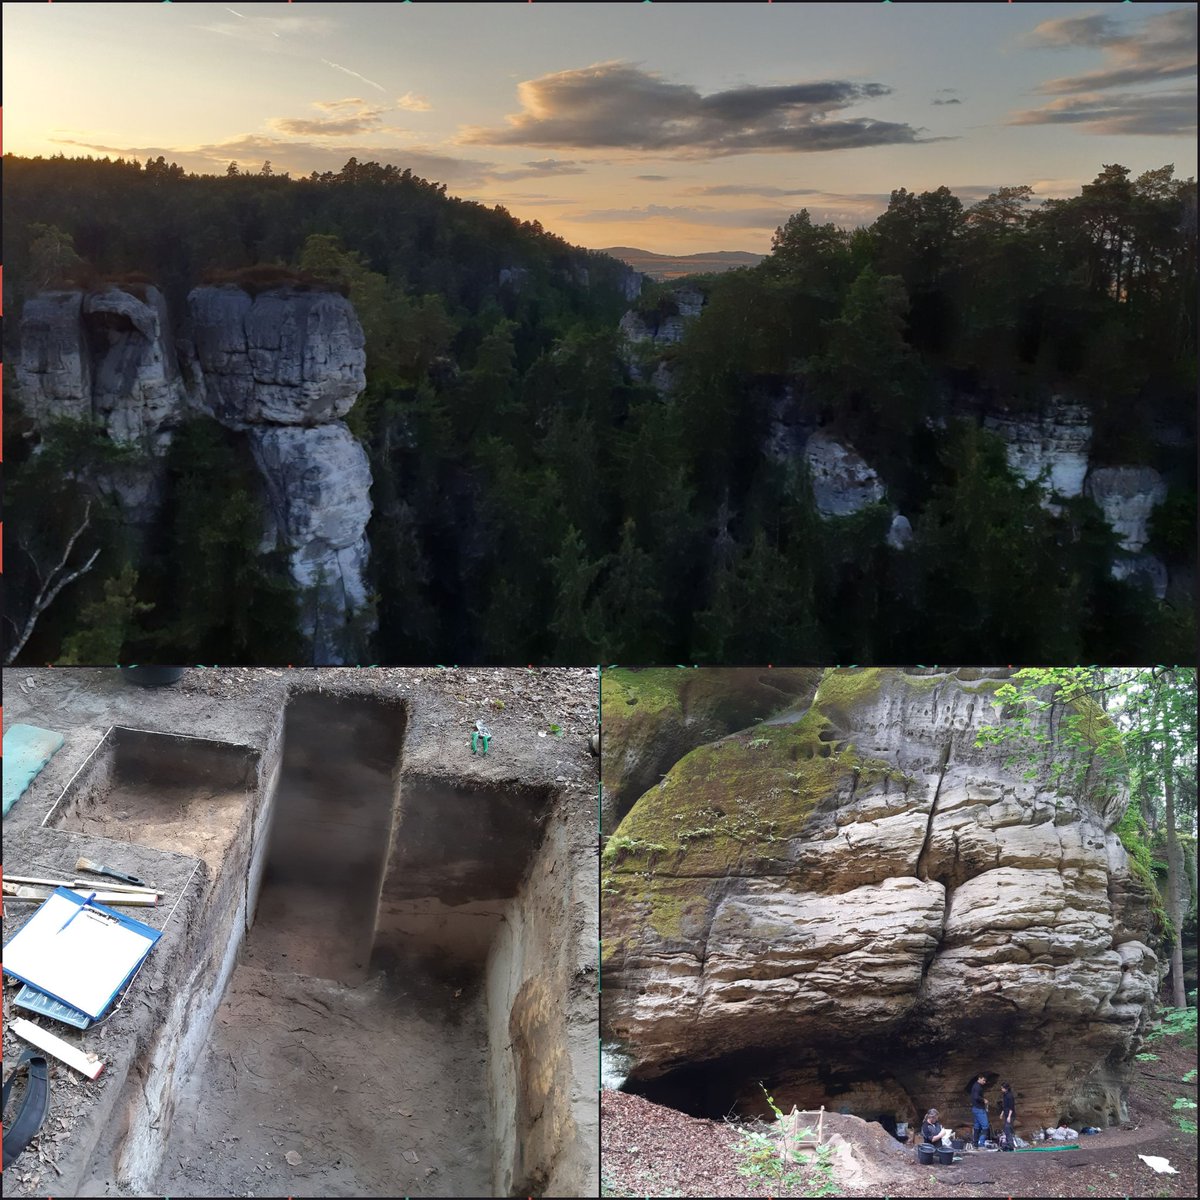 Three amazing days spent at excavation at Hruboskalsko region in Cesky raj (Bohemian Paradise). Left also with something to analyze🙂 Thanks to @Petrda7 and his team!